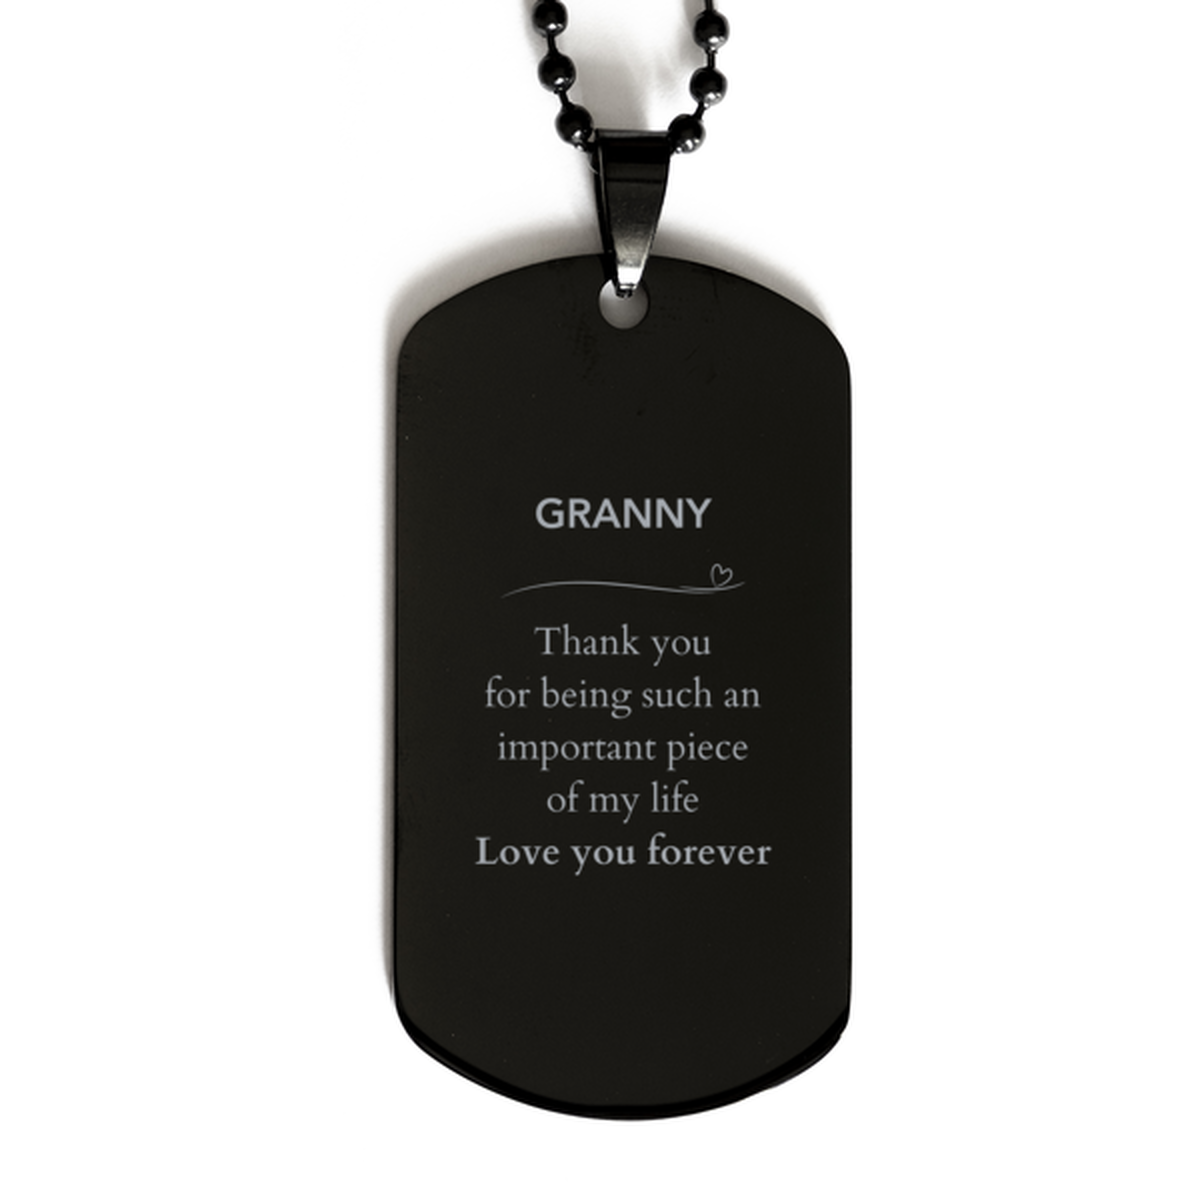 Appropriate Granny Black Dog Tag Epic Birthday Gifts for Granny Thank you for being such an important piece of my life Granny Christmas Mothers Fathers Day